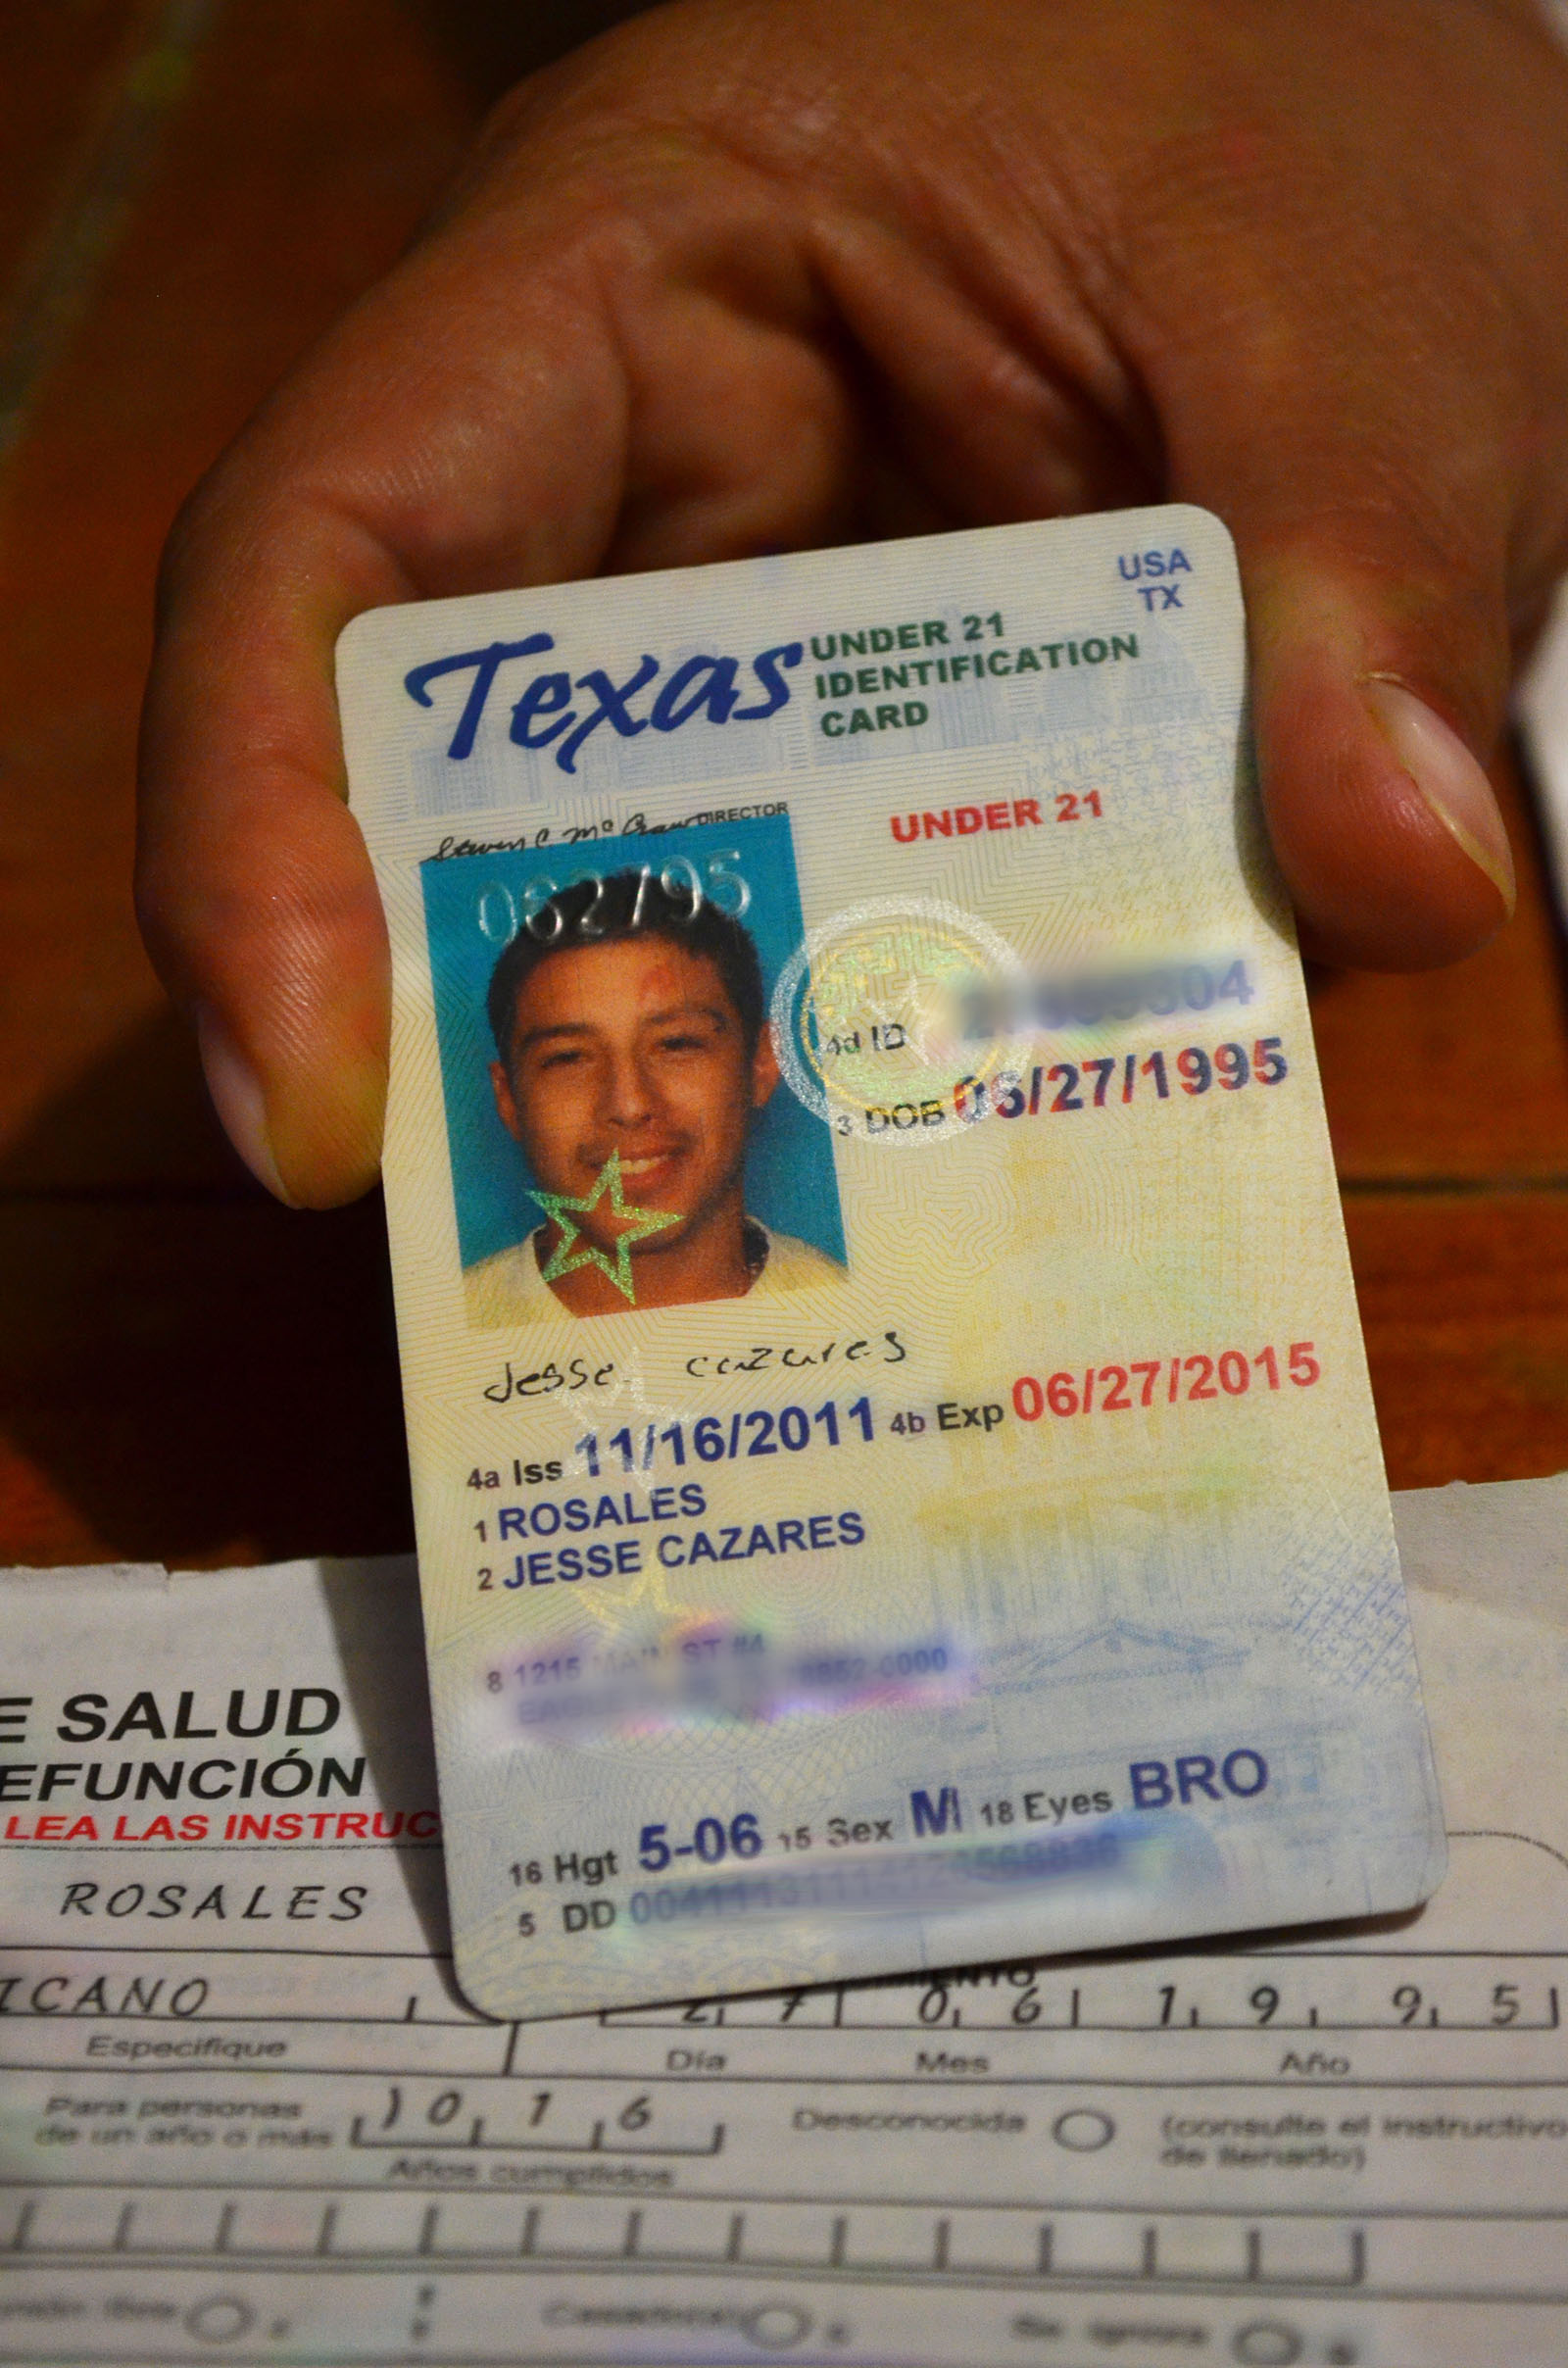 how to find audit number on texas drivers license